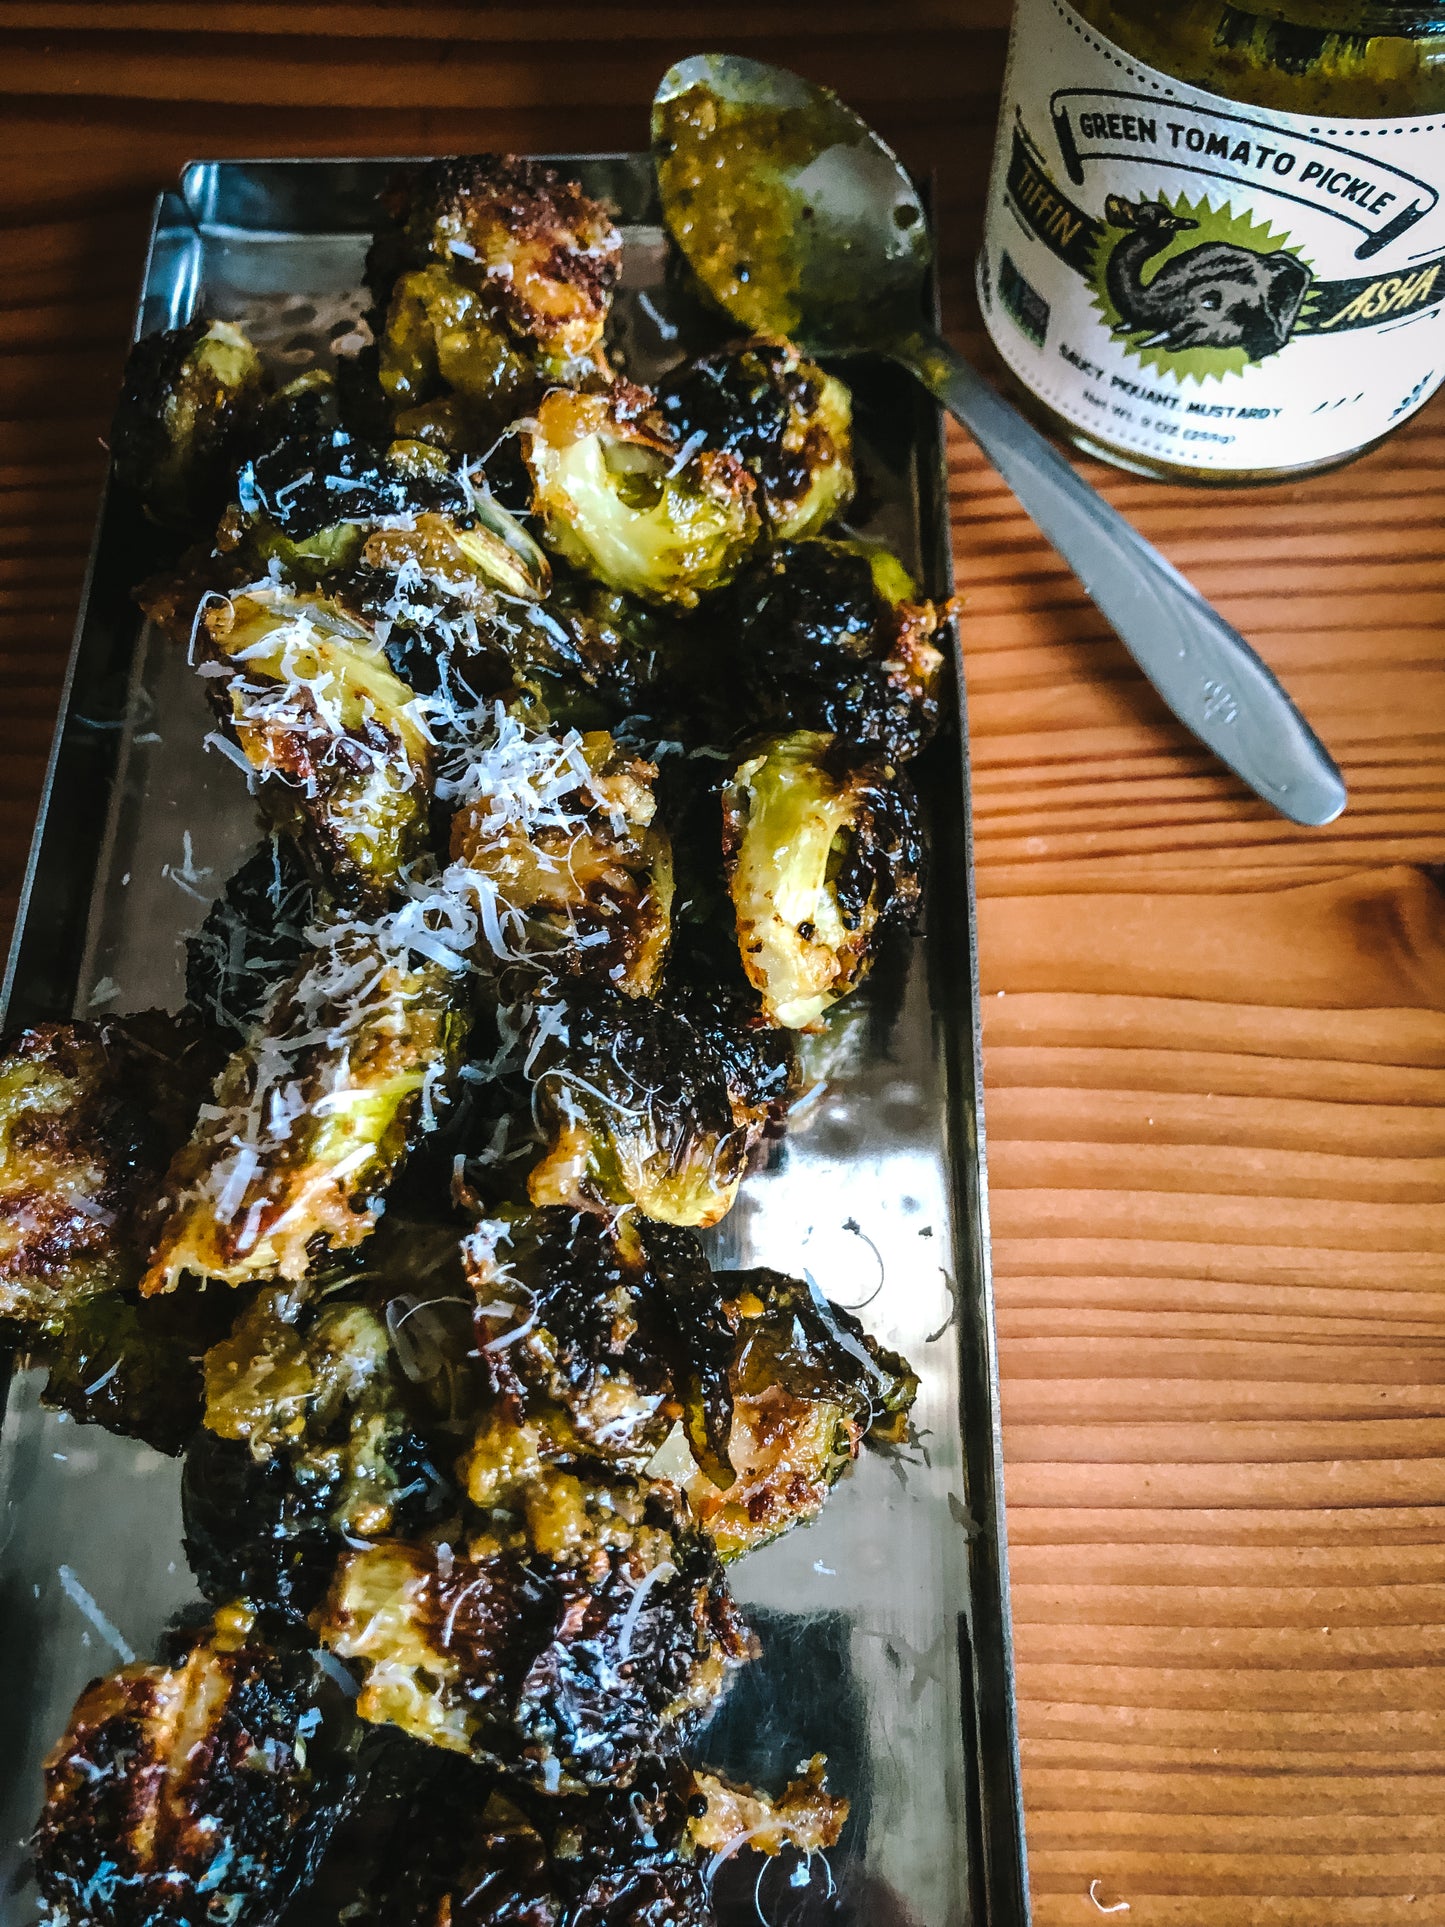 Quick Parmesan Crusted Brussel Sprouts with Green Tomato Pickle